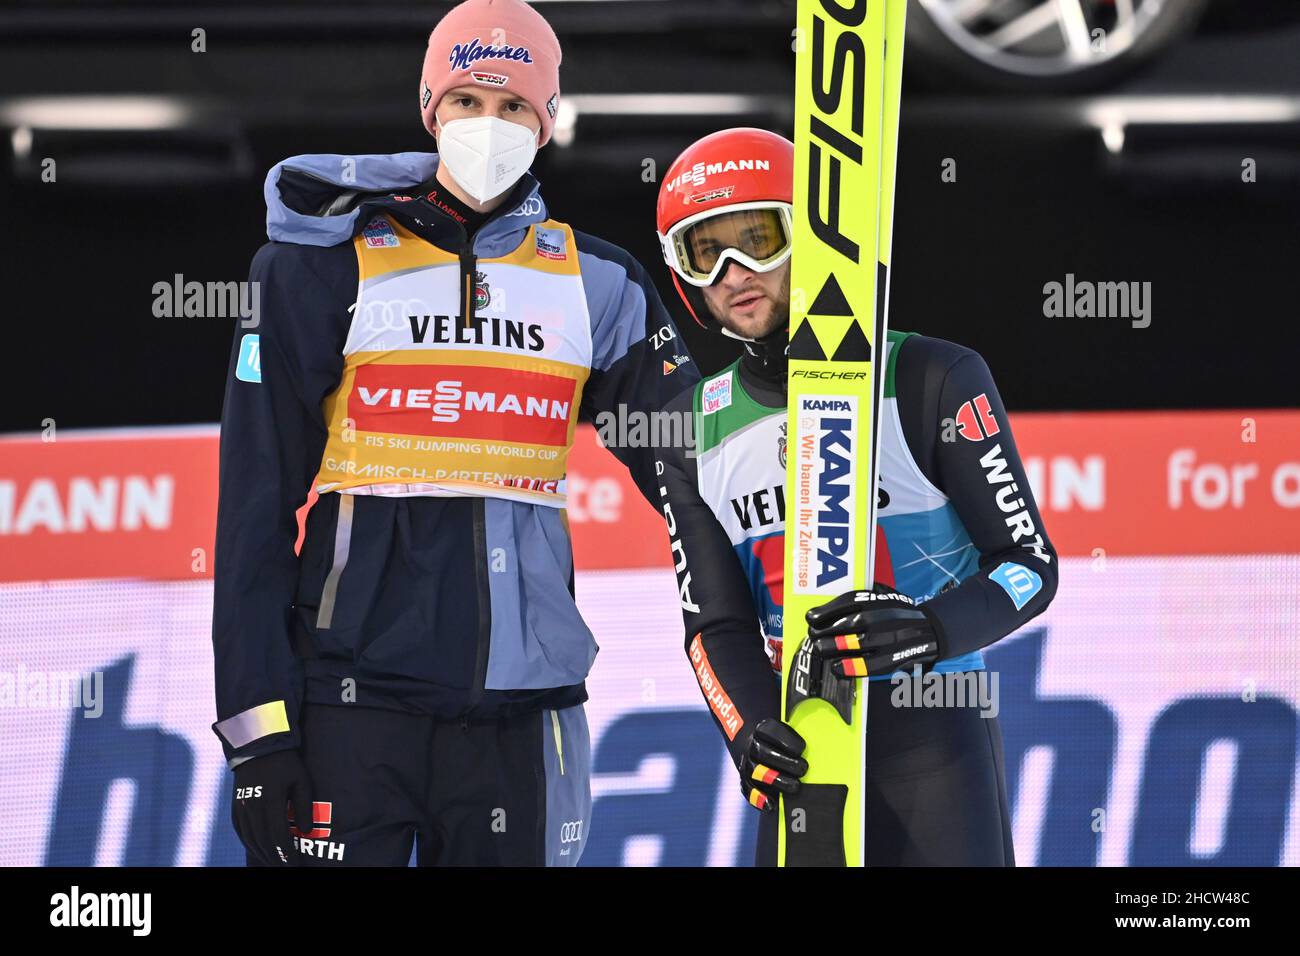 Markus EISENBICHLER (right, GER) Karl GEIGER (GER) in the finish area. Action, ski jumping, 70th International Four Hills Tournament 2021/22, New Year's jump in Garmisch Partenkirchen, Olympic hill on January 1st, 2022 Stock Photo